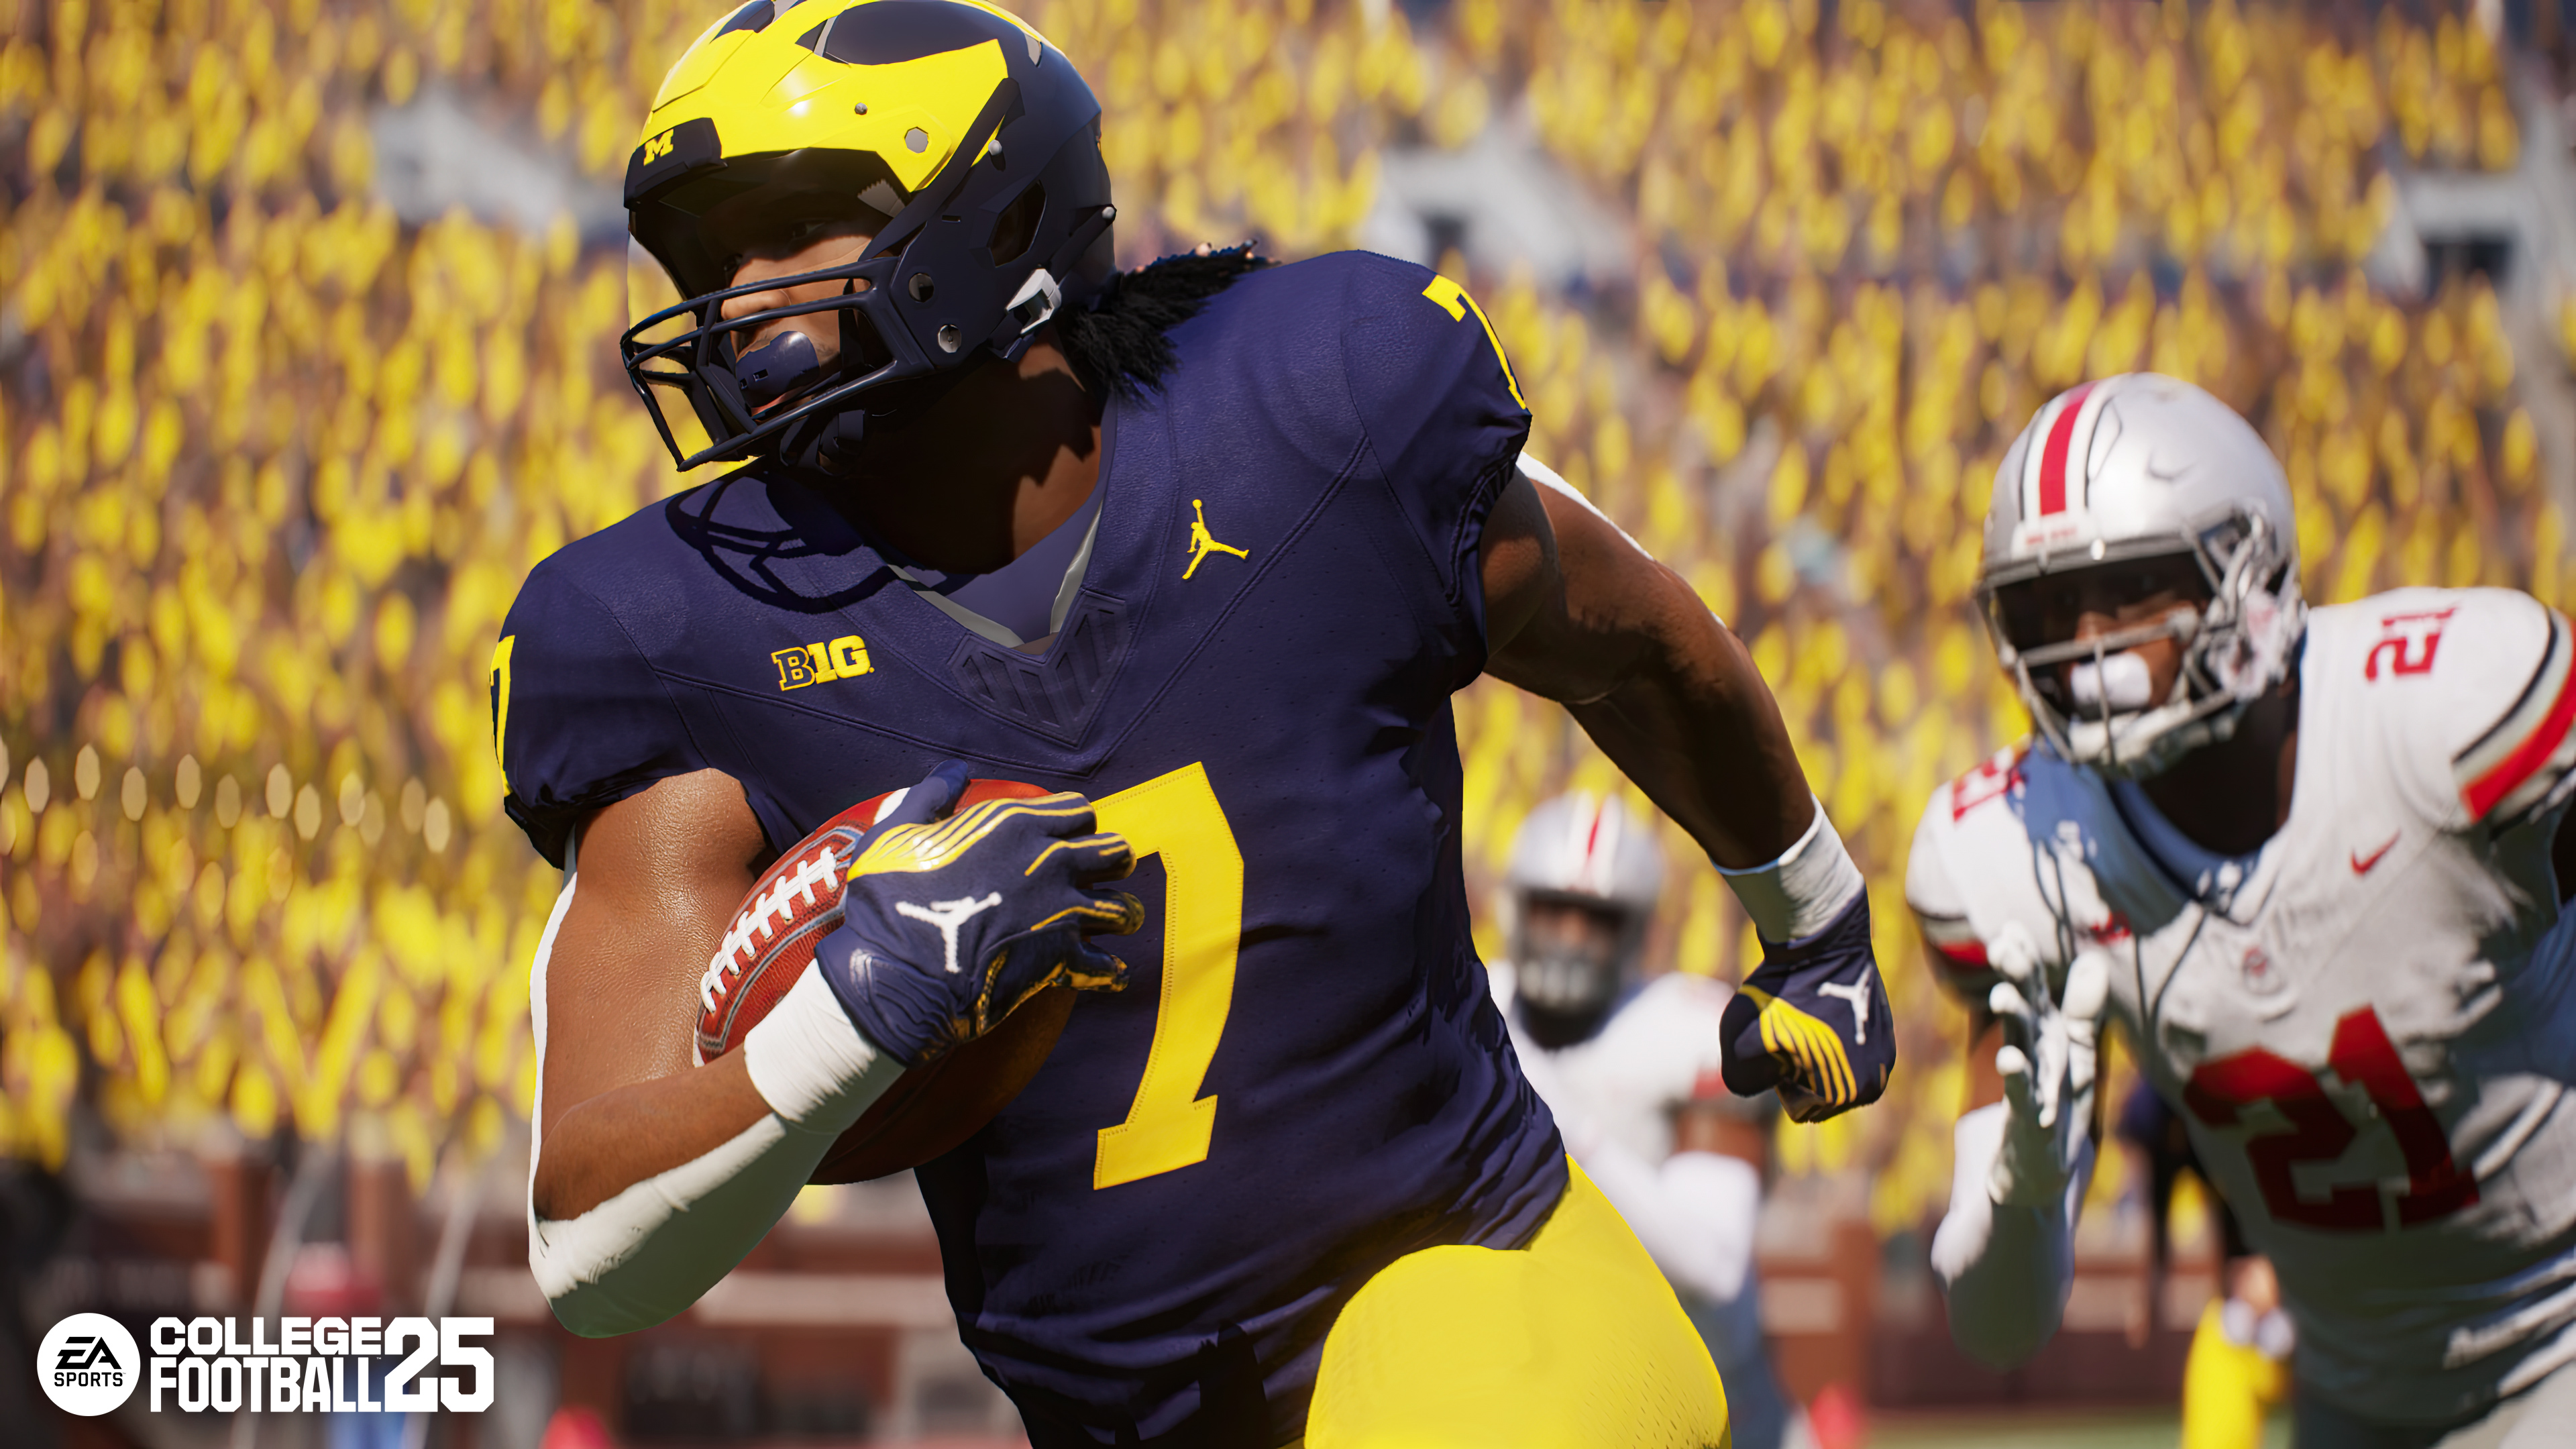 Donovan Edwards of the Michigan Wolverines carries the ball in a screenshot from EA Sports College Football 25